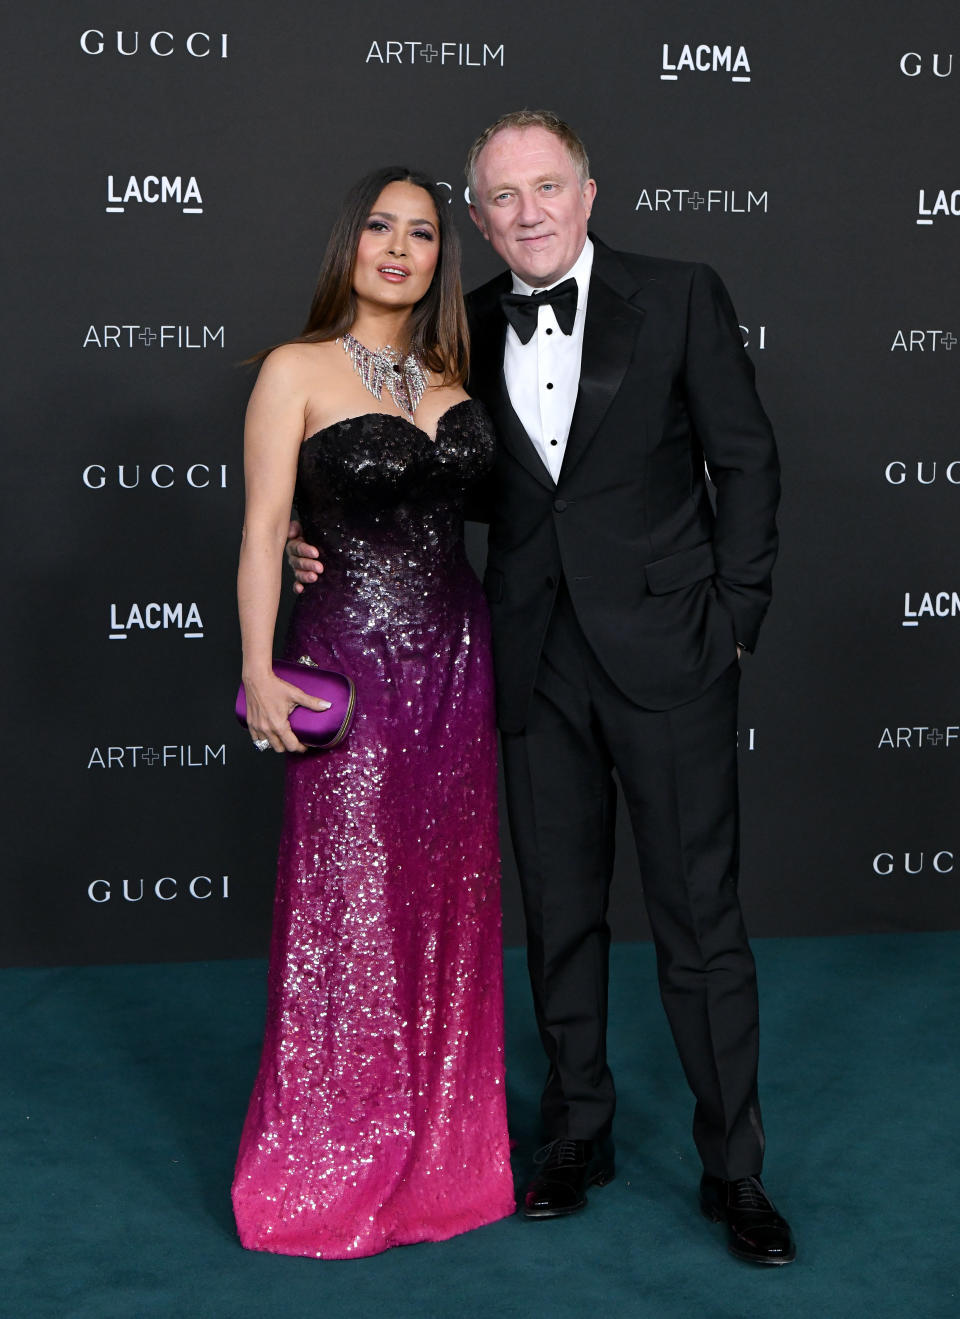 LOS ANGELES, CALIFORNIA - NOVEMBER 06: Salma Hayek Pinault and François-Henri Pinault attend the 10th Annual LACMA Art+Film Gala presented by Gucci at Los Angeles County Museum of Art on November 06, 2021 in Los Angeles, California. (Photo by Axelle/Bauer-Griffin/FilmMagic)